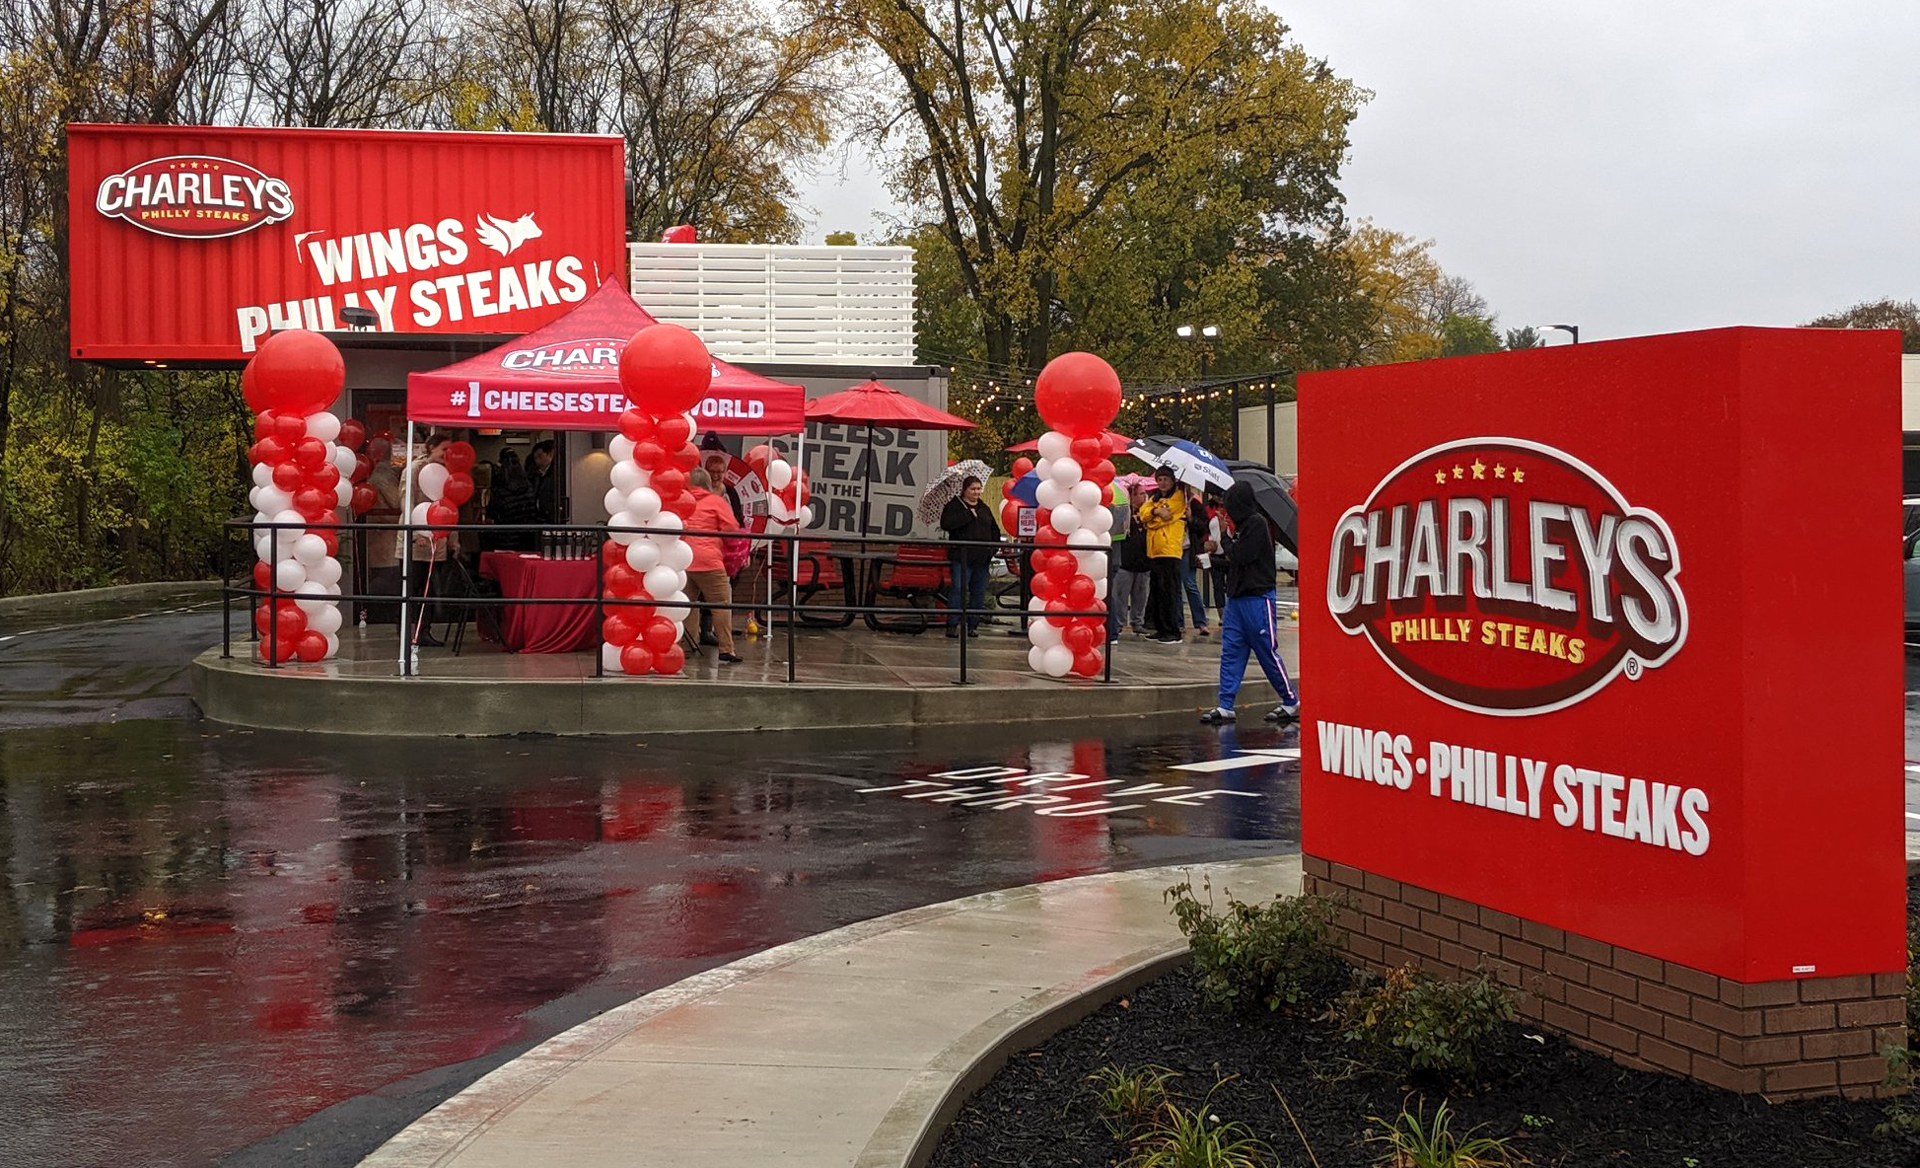 Charleys Philly Steaks, Thursday, October 31, 2019, Press release picture